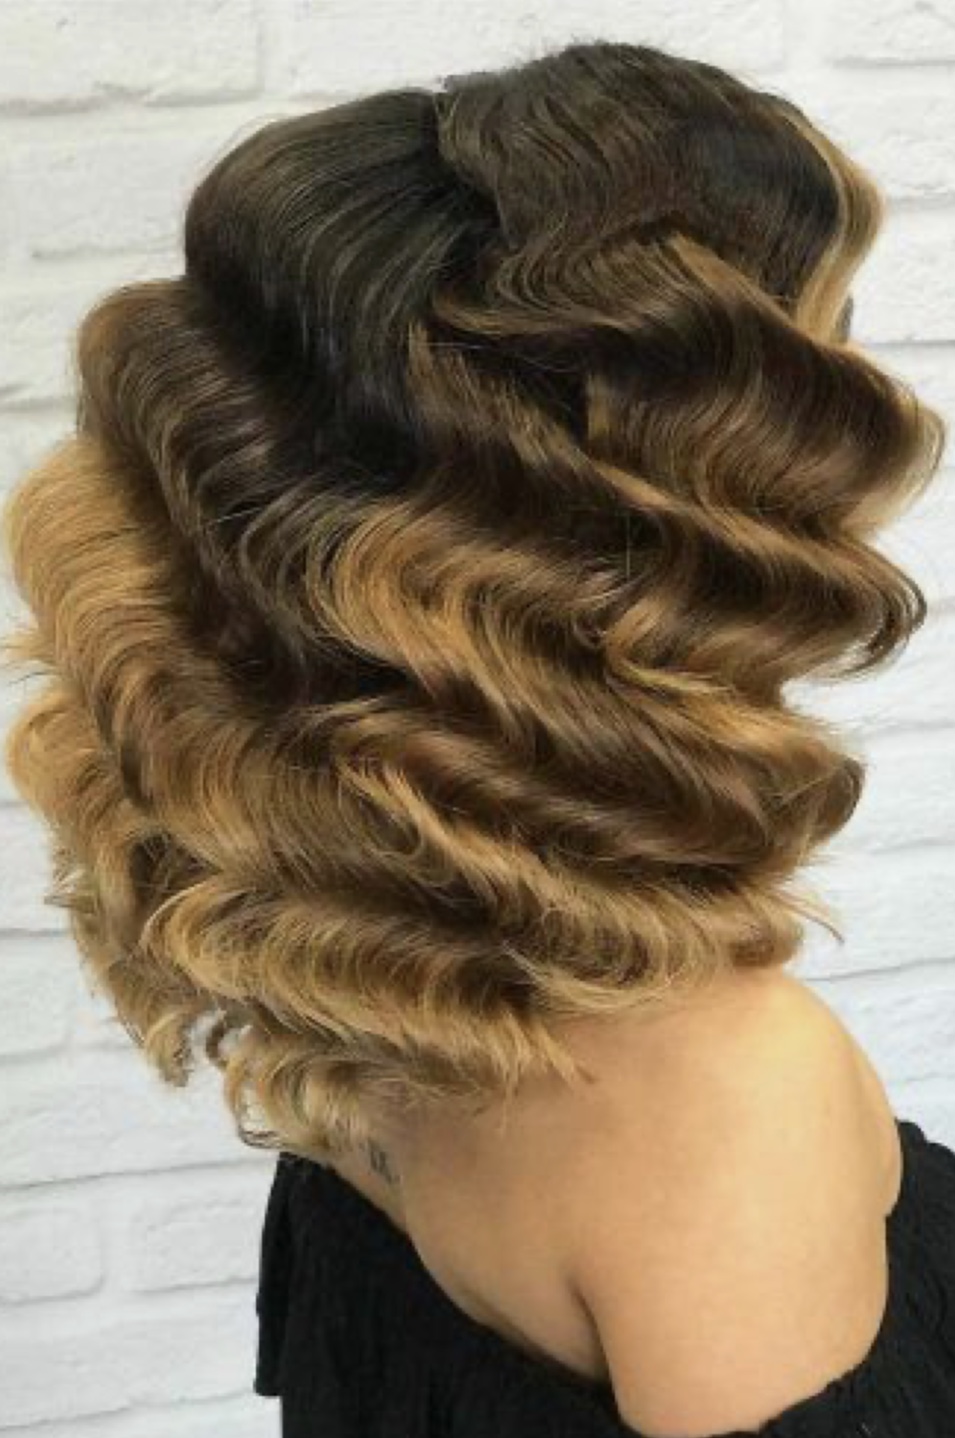 Wedding Hairstyle For Very Short Hair